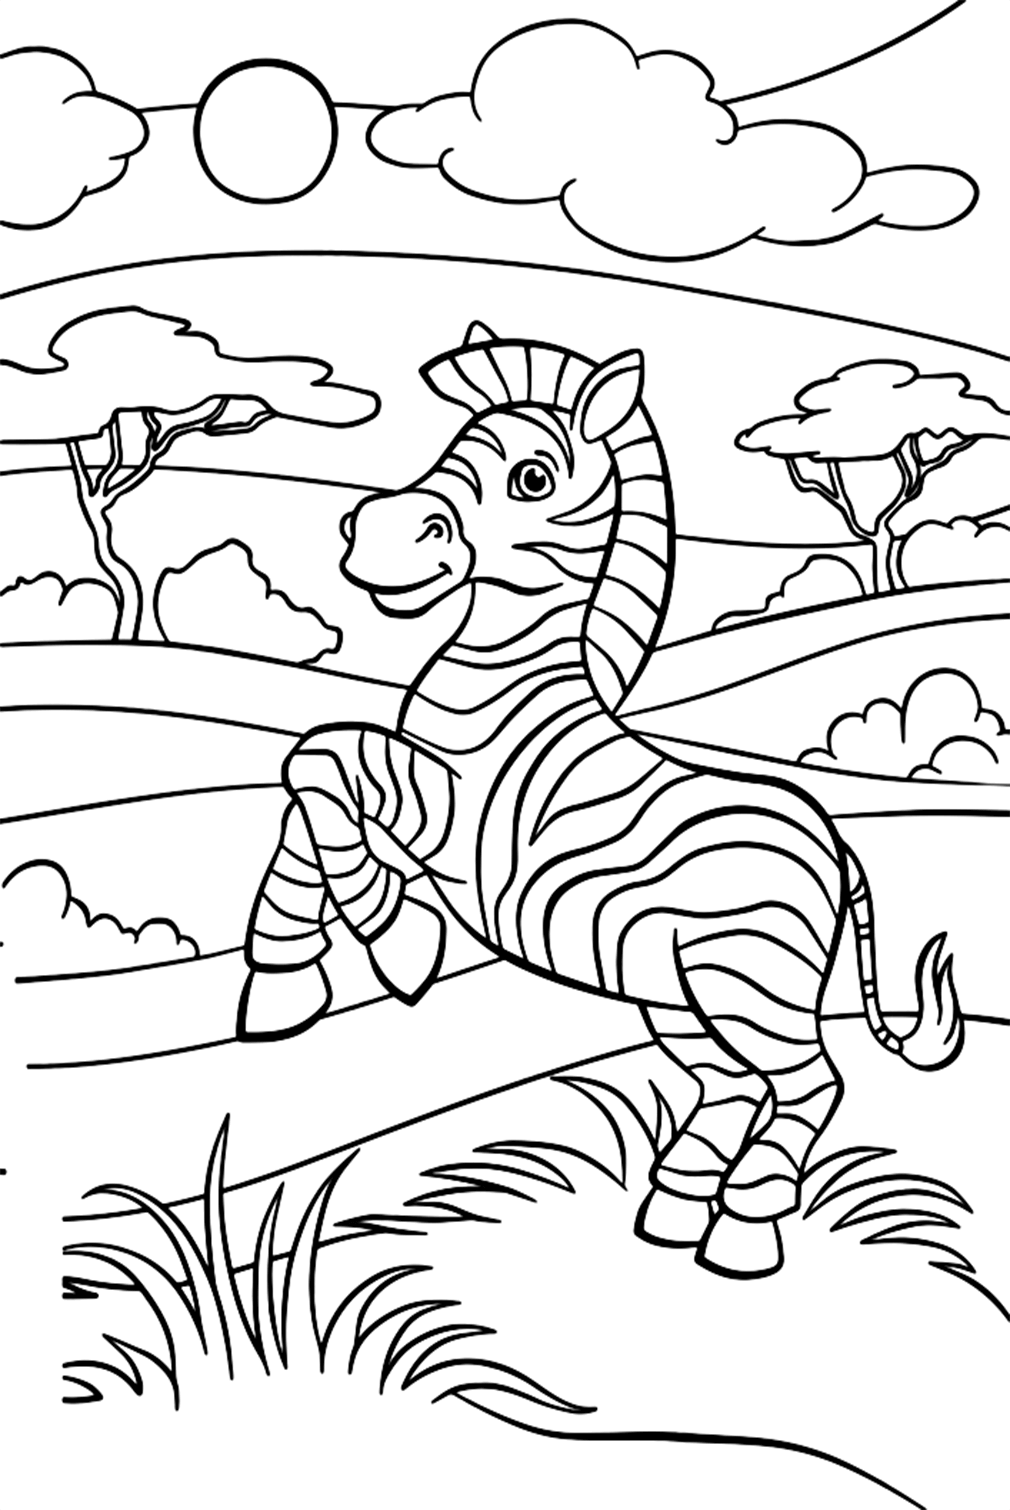 Cute Zebra Coloring Pages